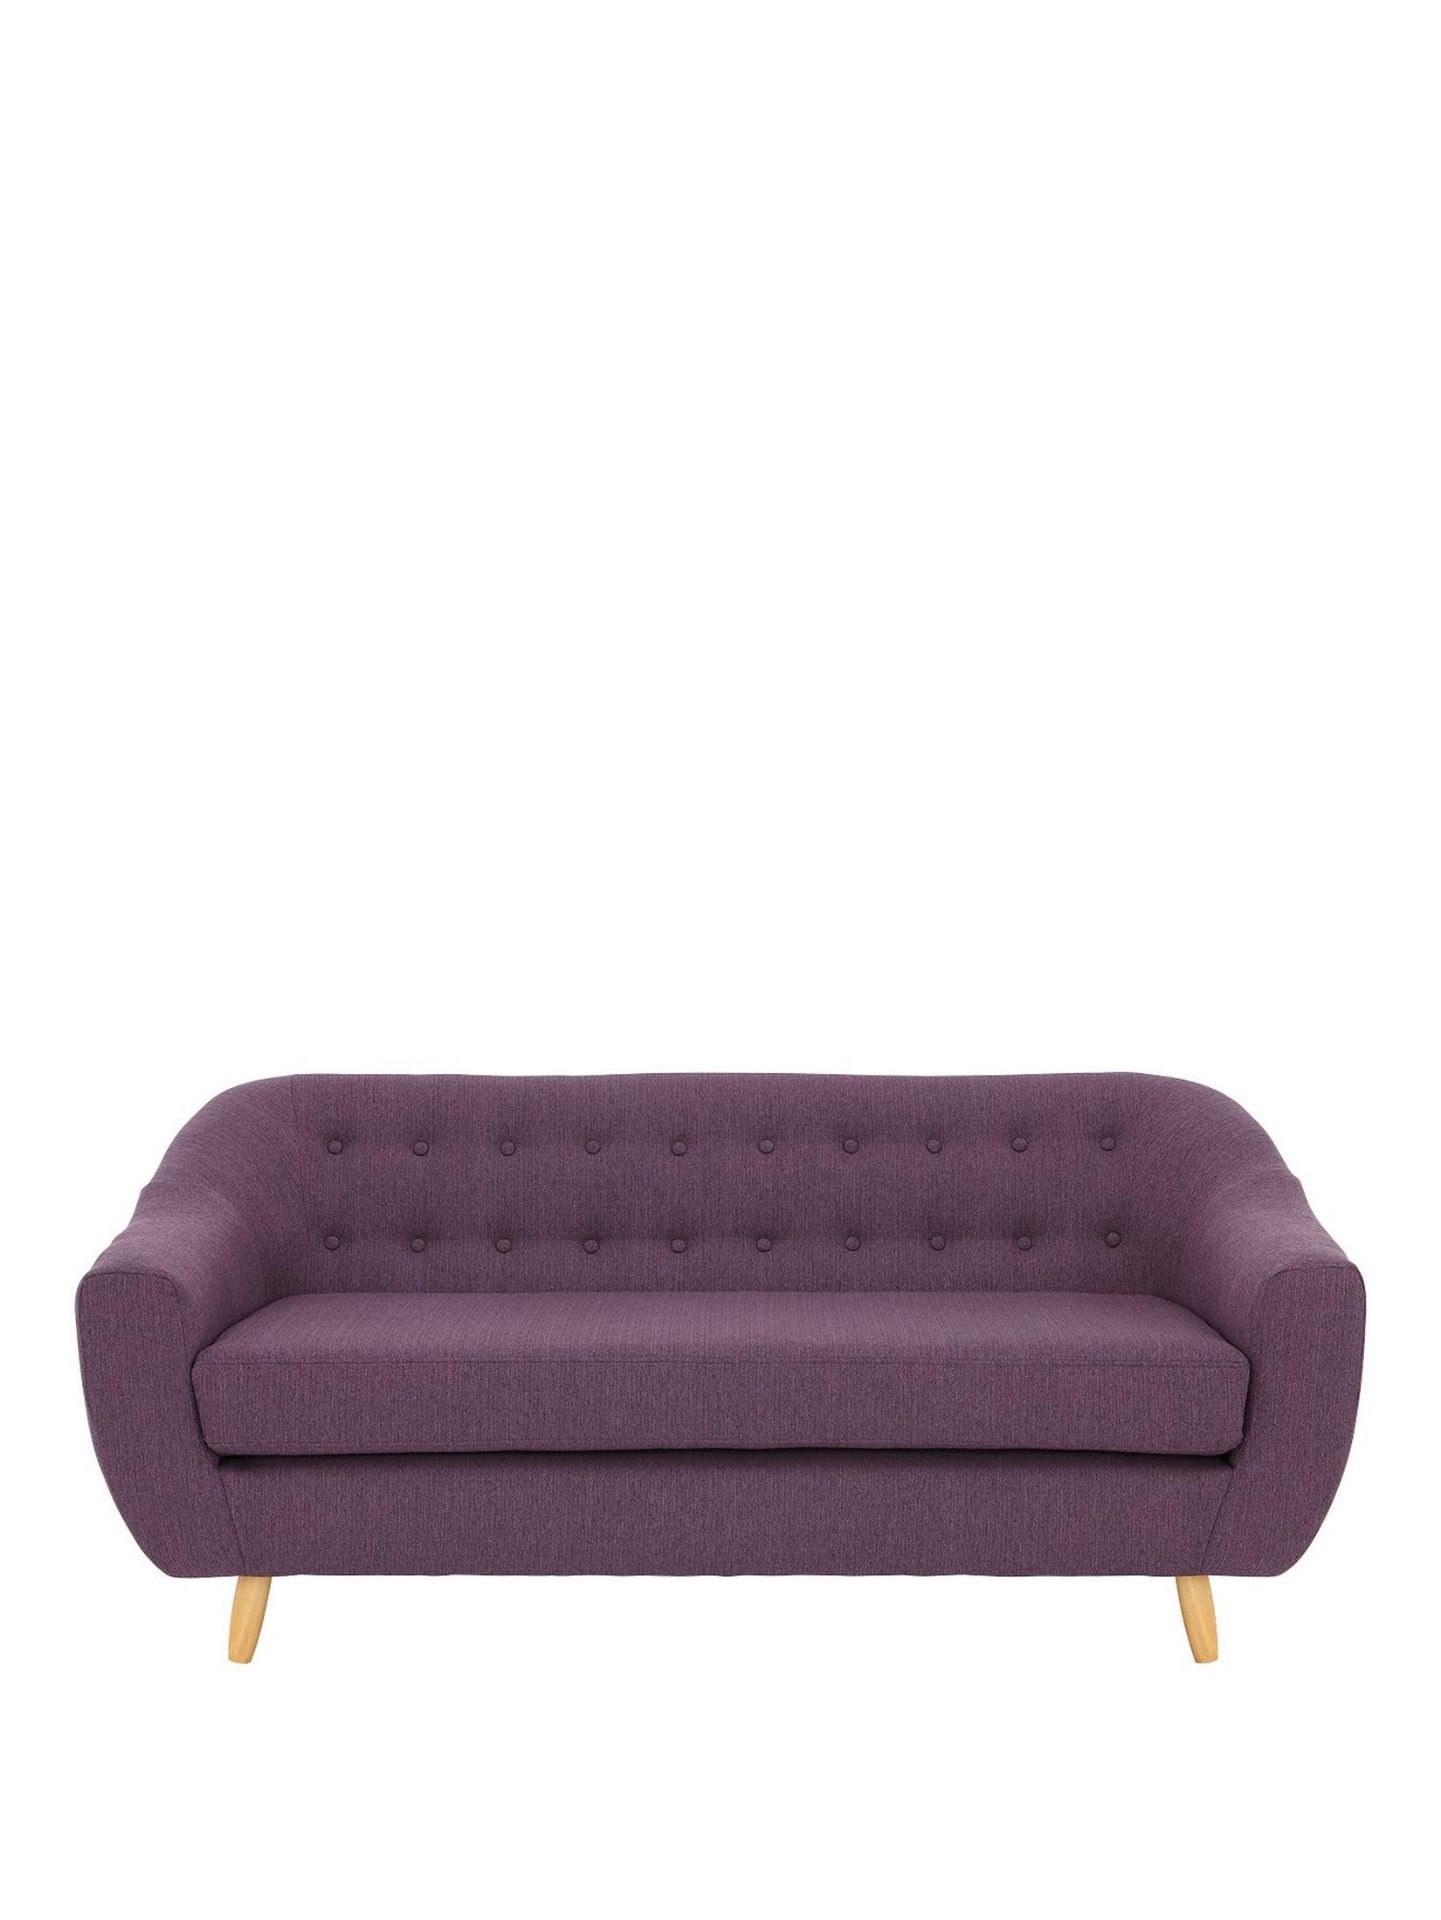 CLAUDIA 3 SEATER SOFA. RPP £479.00. Dimensions: Height 87, Width 188, Depth 82 cm (approx.) - Image 2 of 3